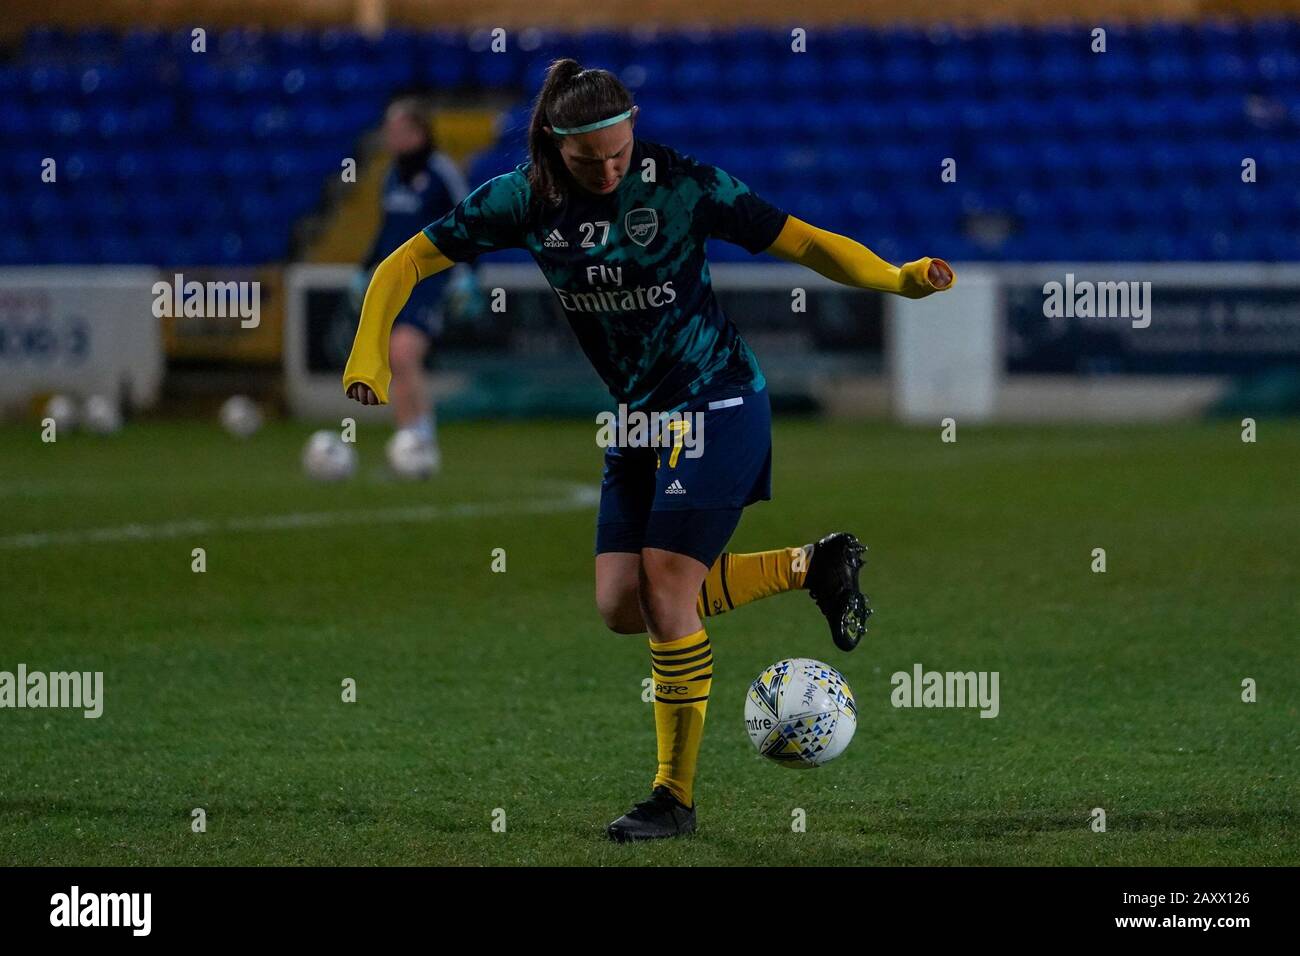 CHESTER. ENGLAND. FEB 13th: Ruby Grant of Arsenal warming up during the Women’s Super League game between Liverpool Women and Arsenal Women at The Deva Stadium in Chester, England. (Photo by Daniela Porcelli/SPP) Stock Photo